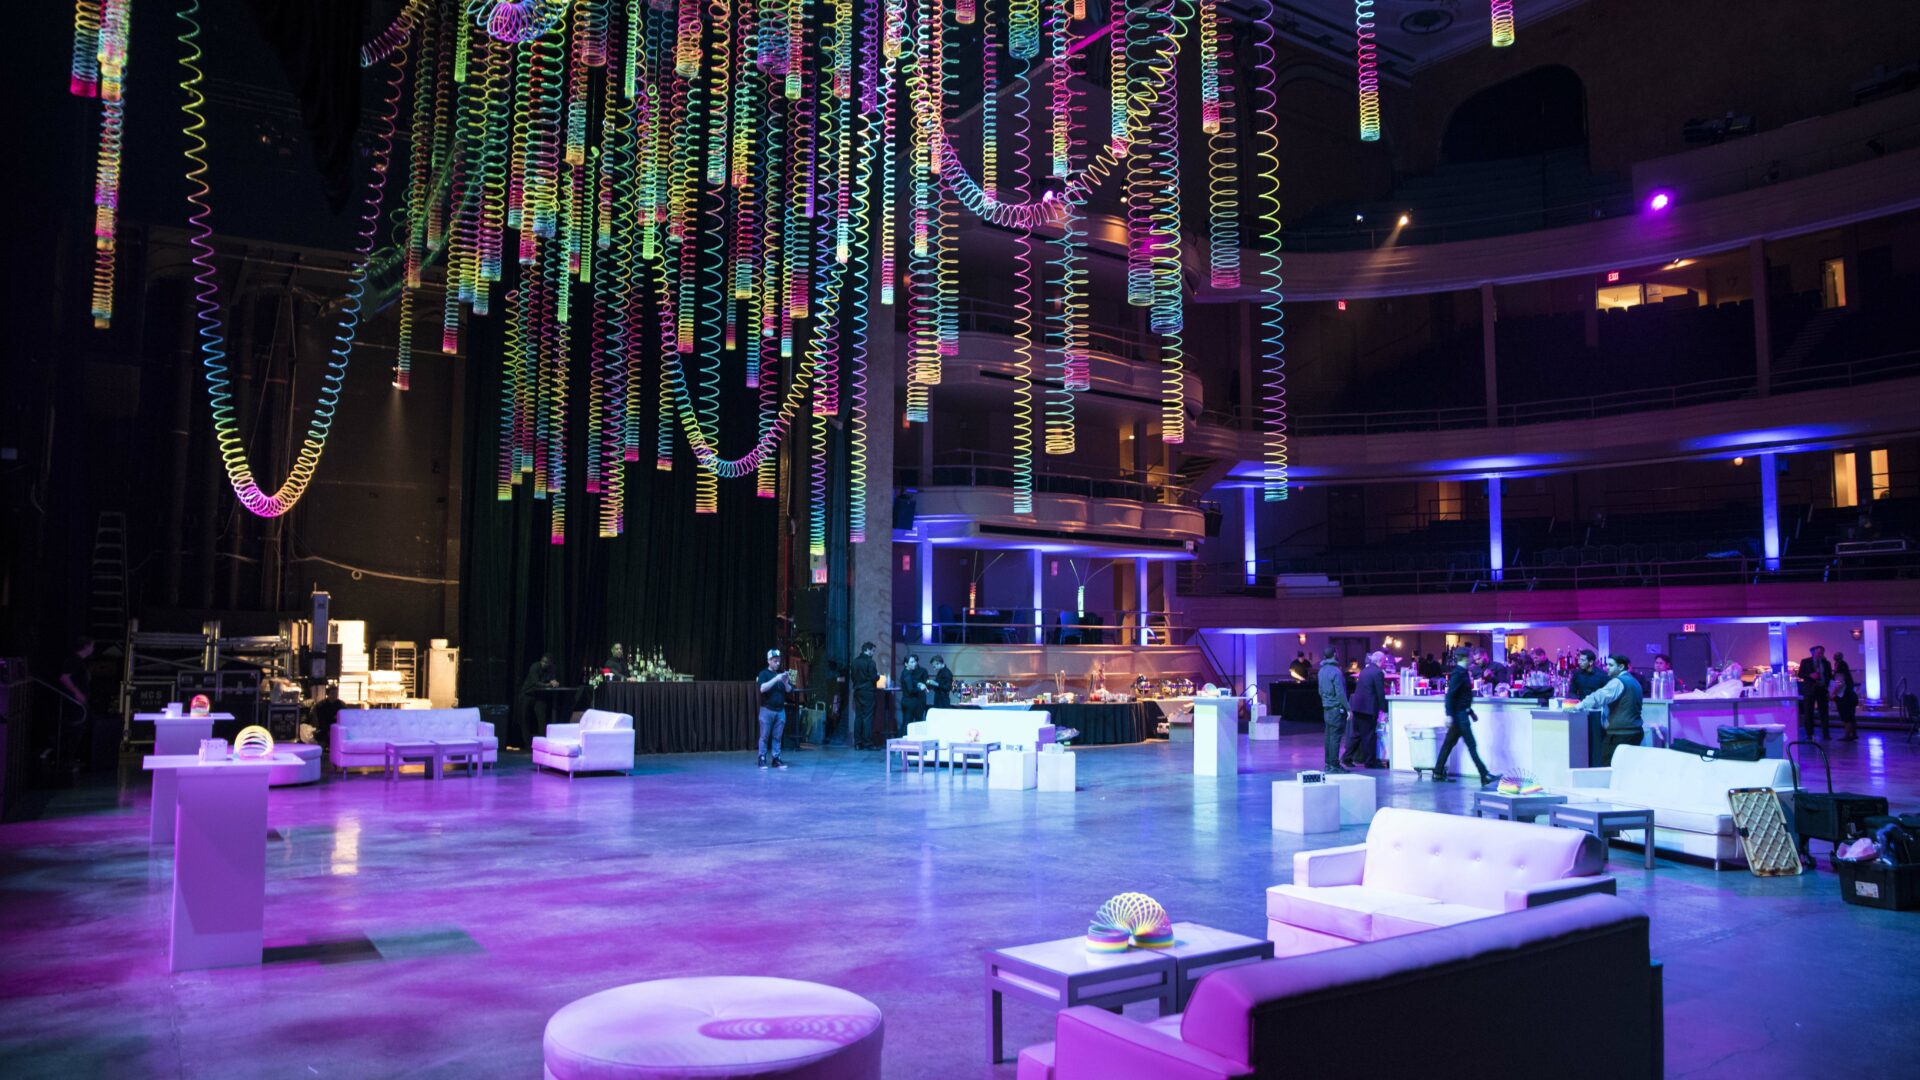 Giant colored slinkies hanging from the ceiling as event decor